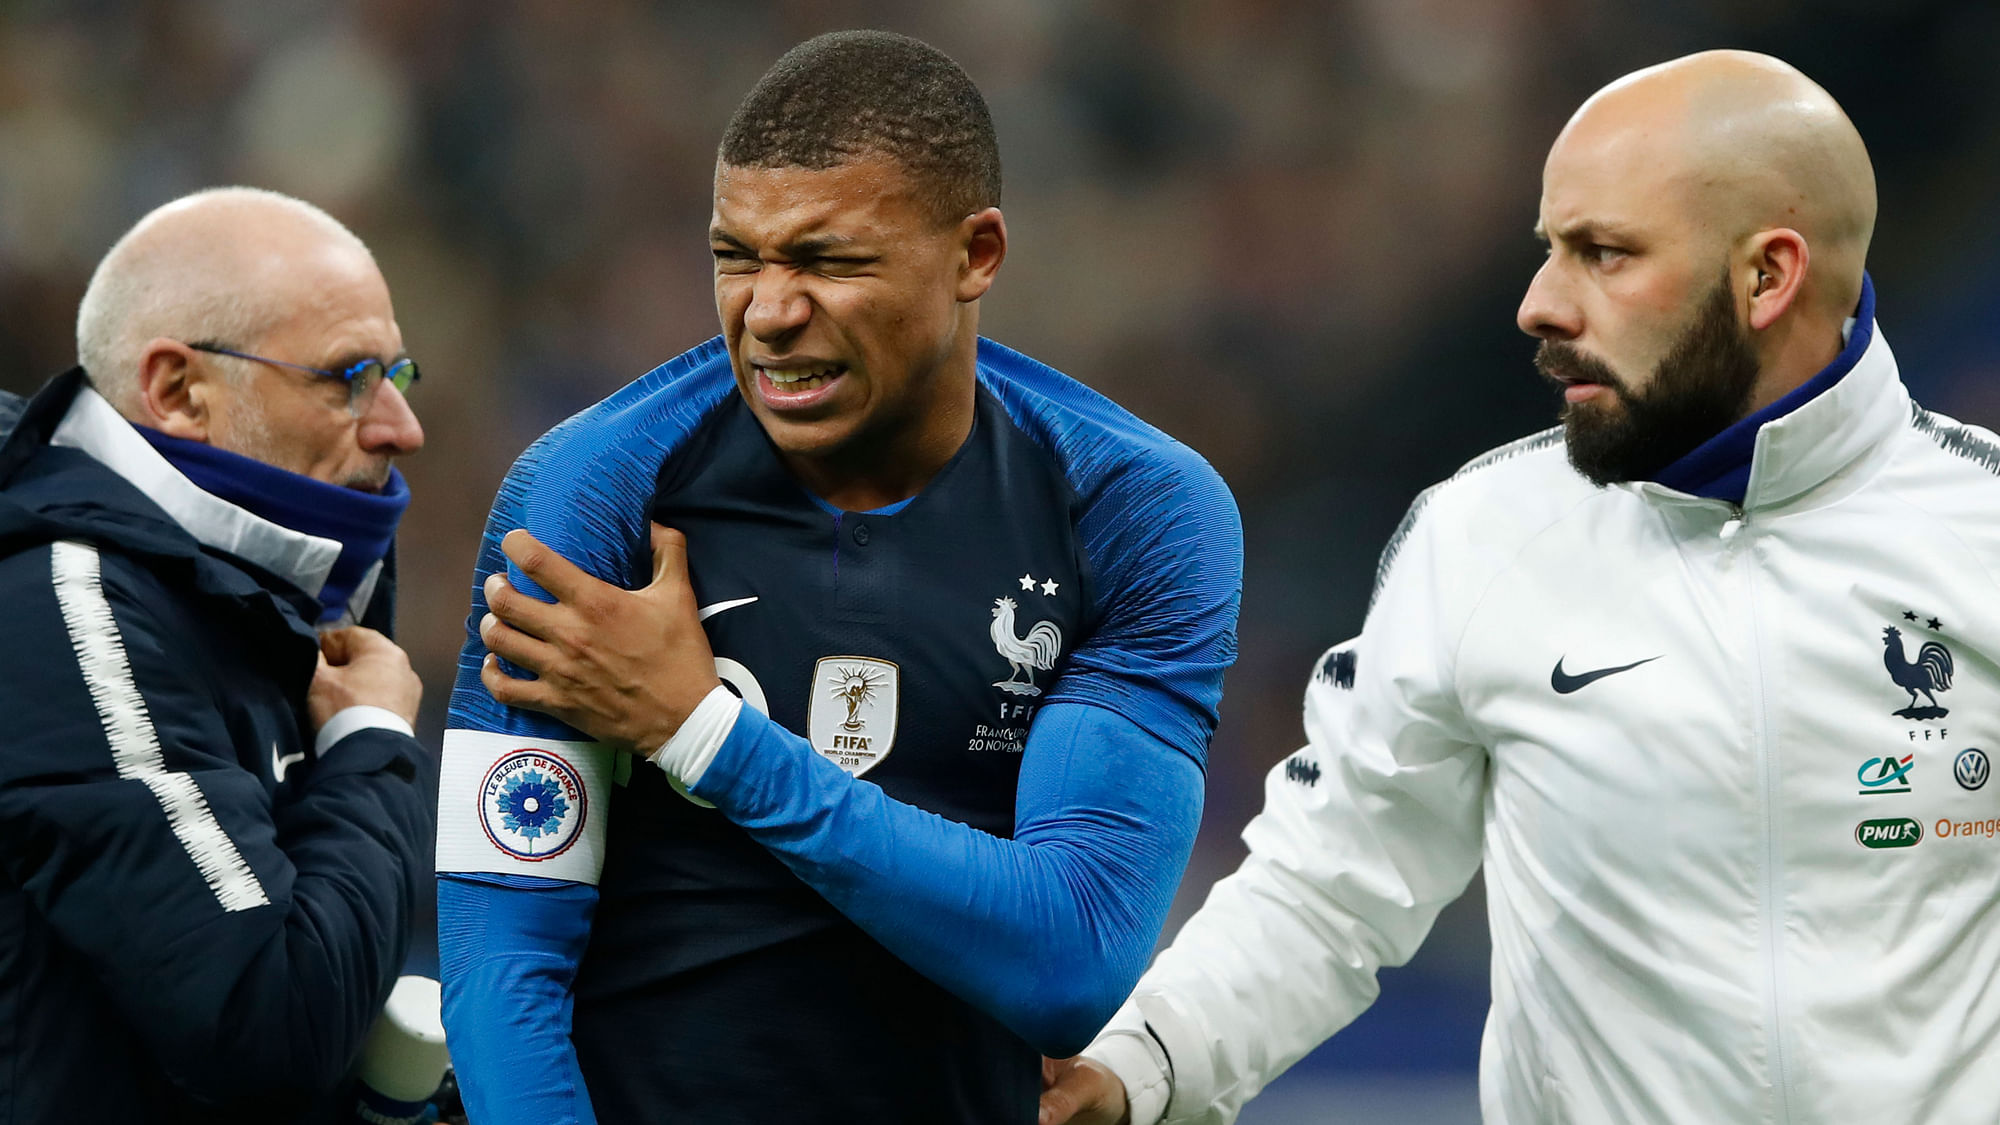 Kylian Mbappe had to leave the game with a shoulder injury.